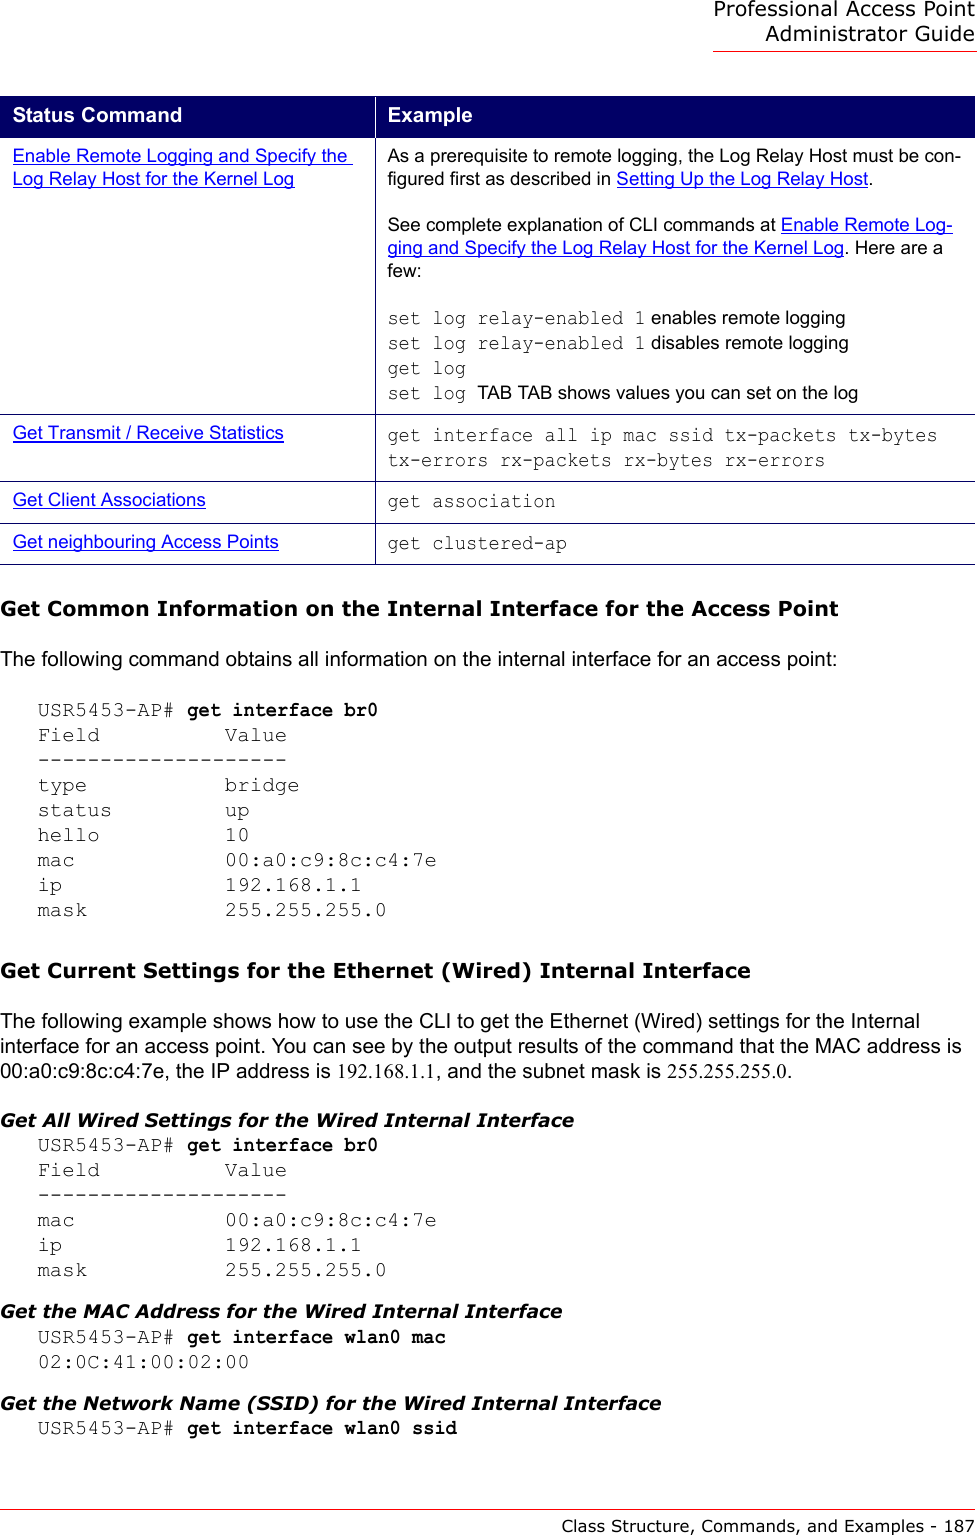 Professional Access Point Administrator GuideClass Structure, Commands, and Examples - 187Get Common Information on the Internal Interface for the Access PointThe following command obtains all information on the internal interface for an access point:USR5453-AP# get interface br0Field          Value--------------------type           bridgestatus         uphello          10mac            00:a0:c9:8c:c4:7eip             192.168.1.1mask           255.255.255.0Get Current Settings for the Ethernet (Wired) Internal InterfaceThe following example shows how to use the CLI to get the Ethernet (Wired) settings for the Internal interface for an access point. You can see by the output results of the command that the MAC address is 00:a0:c9:8c:c4:7e, the IP address is 192.168.1.1, and the subnet mask is 255.255.255.0.Get All Wired Settings for the Wired Internal InterfaceUSR5453-AP# get interface br0Field          Value--------------------mac            00:a0:c9:8c:c4:7eip             192.168.1.1mask           255.255.255.0Get the MAC Address for the Wired Internal InterfaceUSR5453-AP# get interface wlan0 mac02:0C:41:00:02:00Get the Network Name (SSID) for the Wired Internal InterfaceUSR5453-AP# get interface wlan0 ssidEnable Remote Logging and Specify the Log Relay Host for the Kernel LogAs a prerequisite to remote logging, the Log Relay Host must be con-figured first as described in Setting Up the Log Relay Host.See complete explanation of CLI commands at Enable Remote Log-ging and Specify the Log Relay Host for the Kernel Log. Here are a few:set log relay-enabled 1 enables remote logging set log relay-enabled 1 disables remote logging get log set log TAB TAB shows values you can set on the logGet Transmit / Receive Statisticsget interface all ip mac ssid tx-packets tx-bytes tx-errors rx-packets rx-bytes rx-errorsGet Client Associationsget associationGet neighbouring Access Pointsget clustered-apStatus Command Example